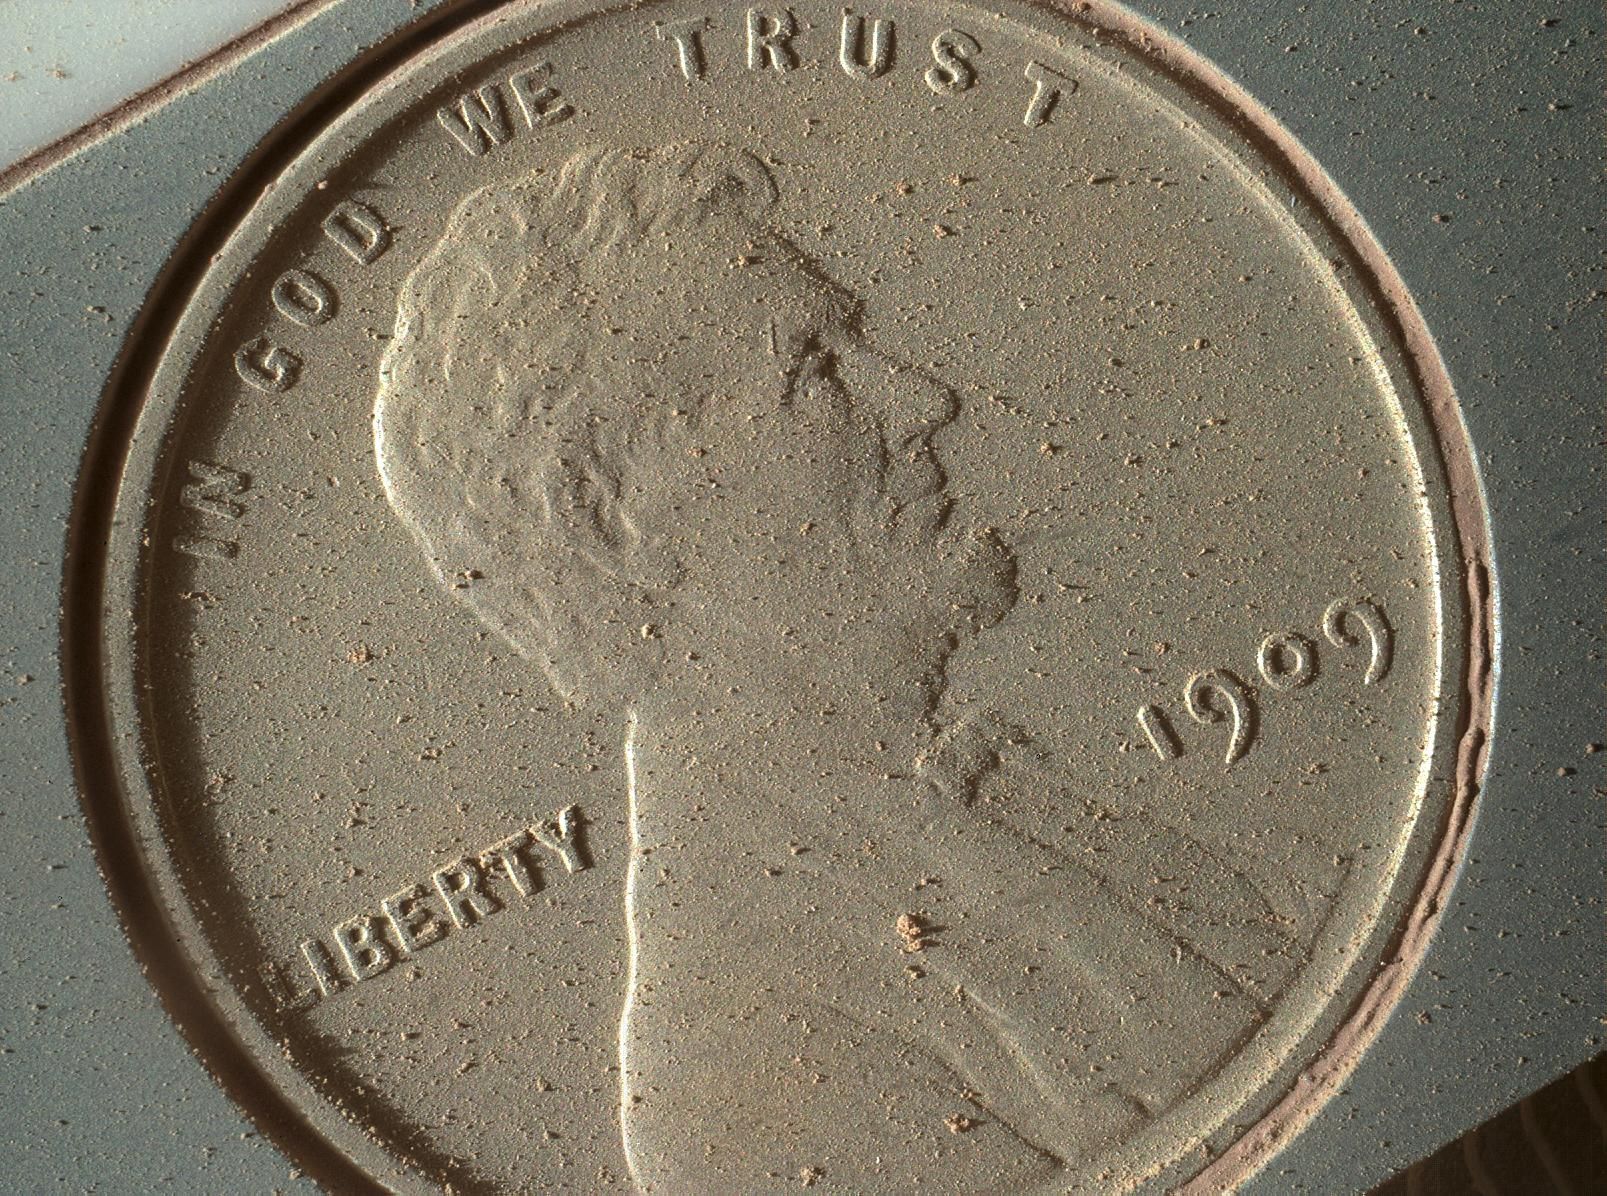 Penny covered with Martian dust.